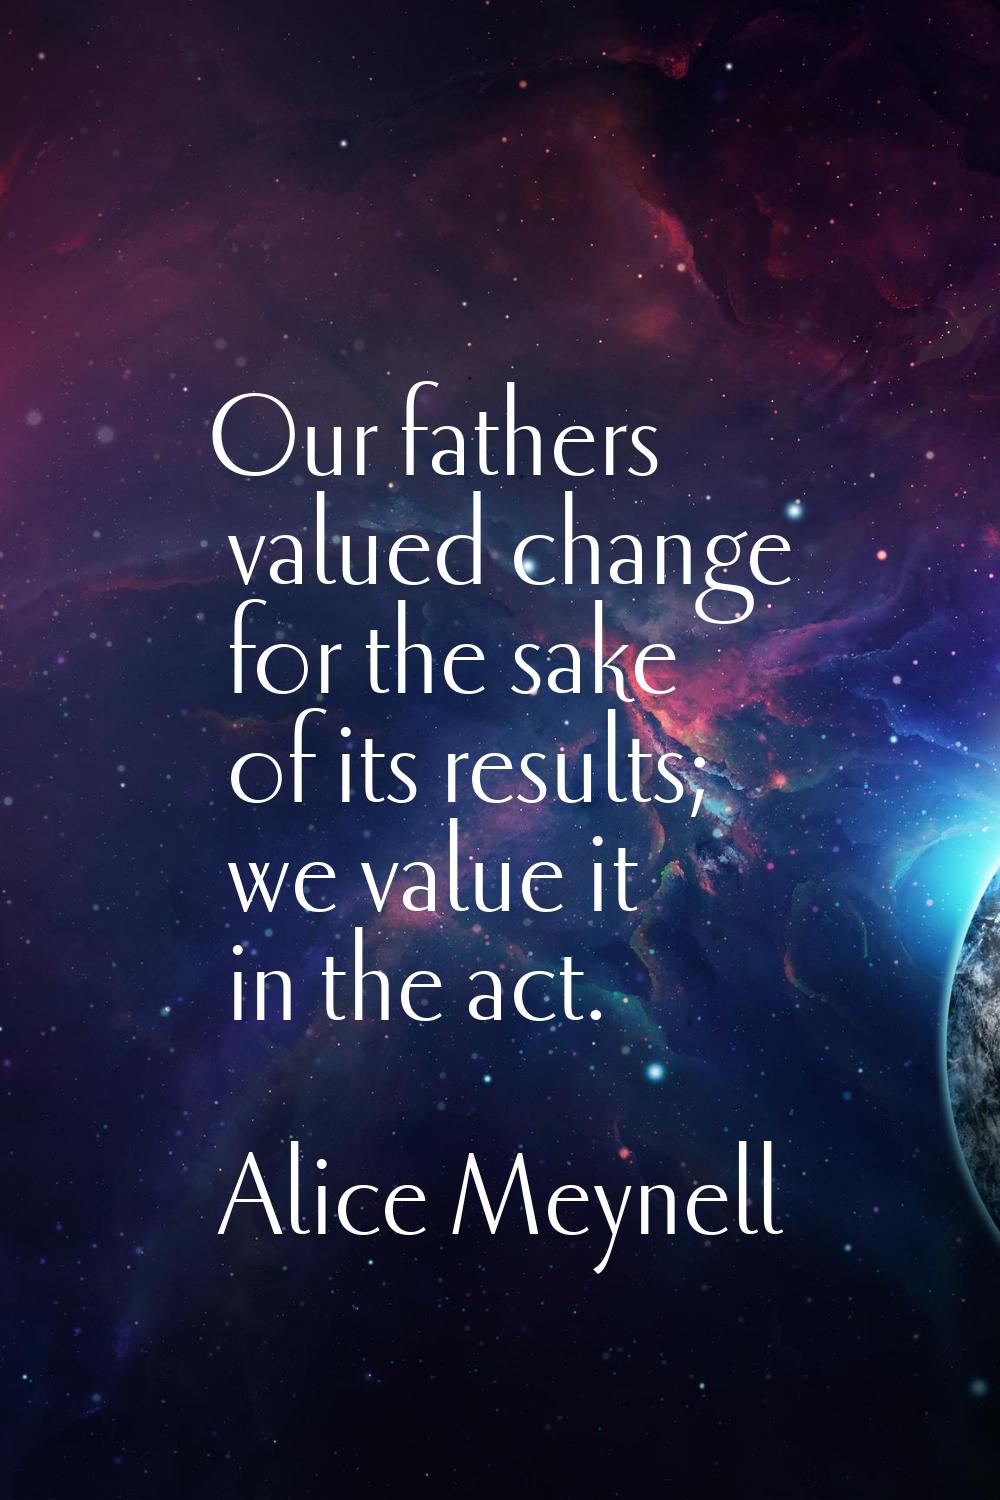 Our fathers valued change for the sake of its results; we value it in the act.